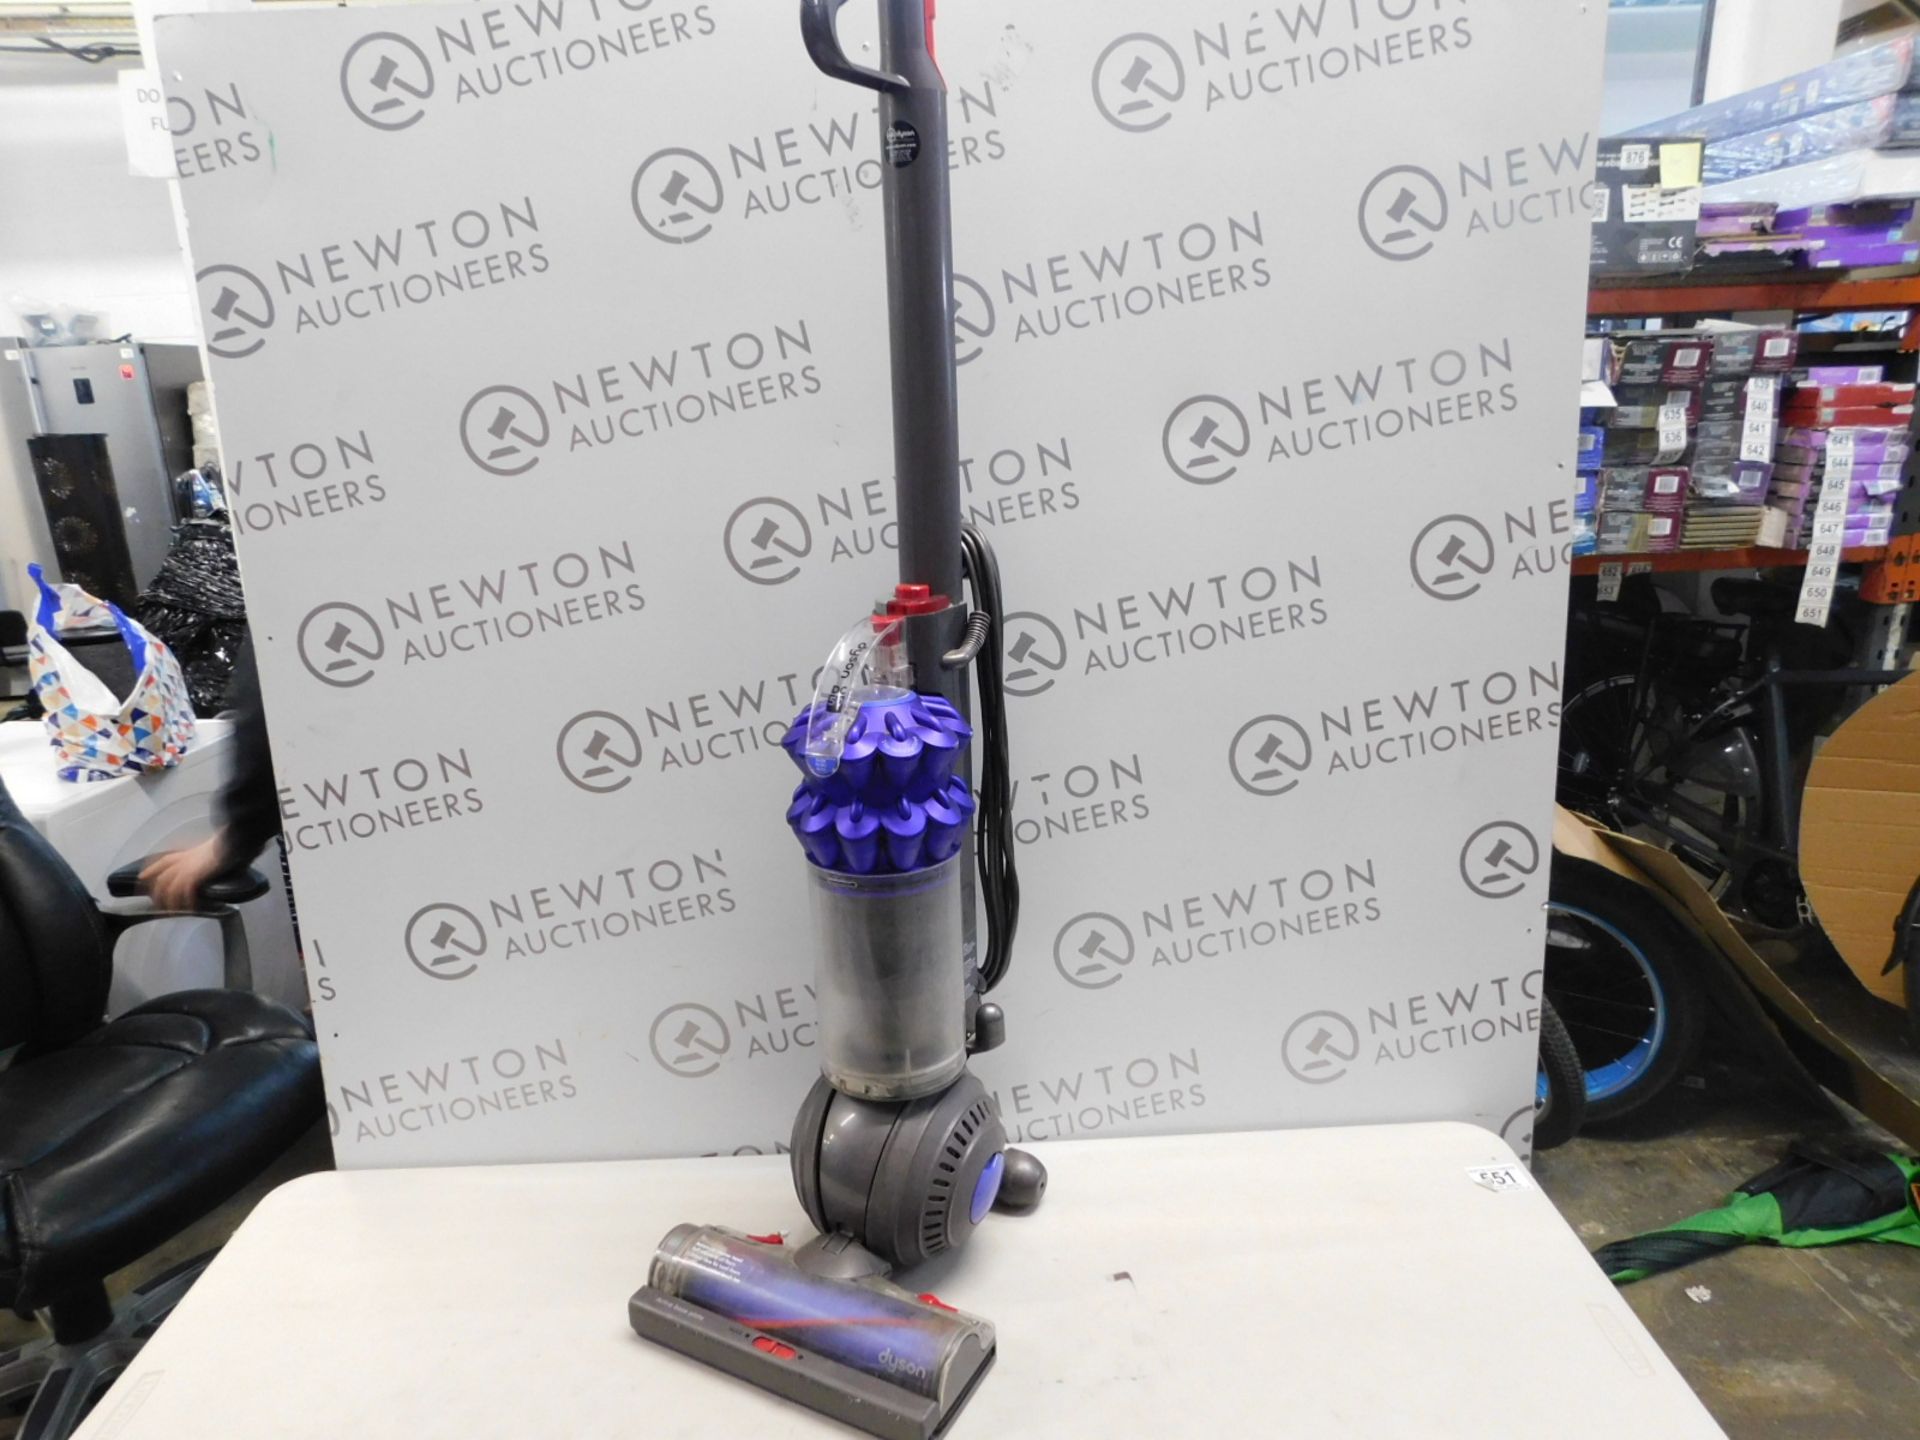 1 DYSON DC50 ANIMAL COMPACT UPRIGHT VACUUM CLEANER RRP Â£389.99